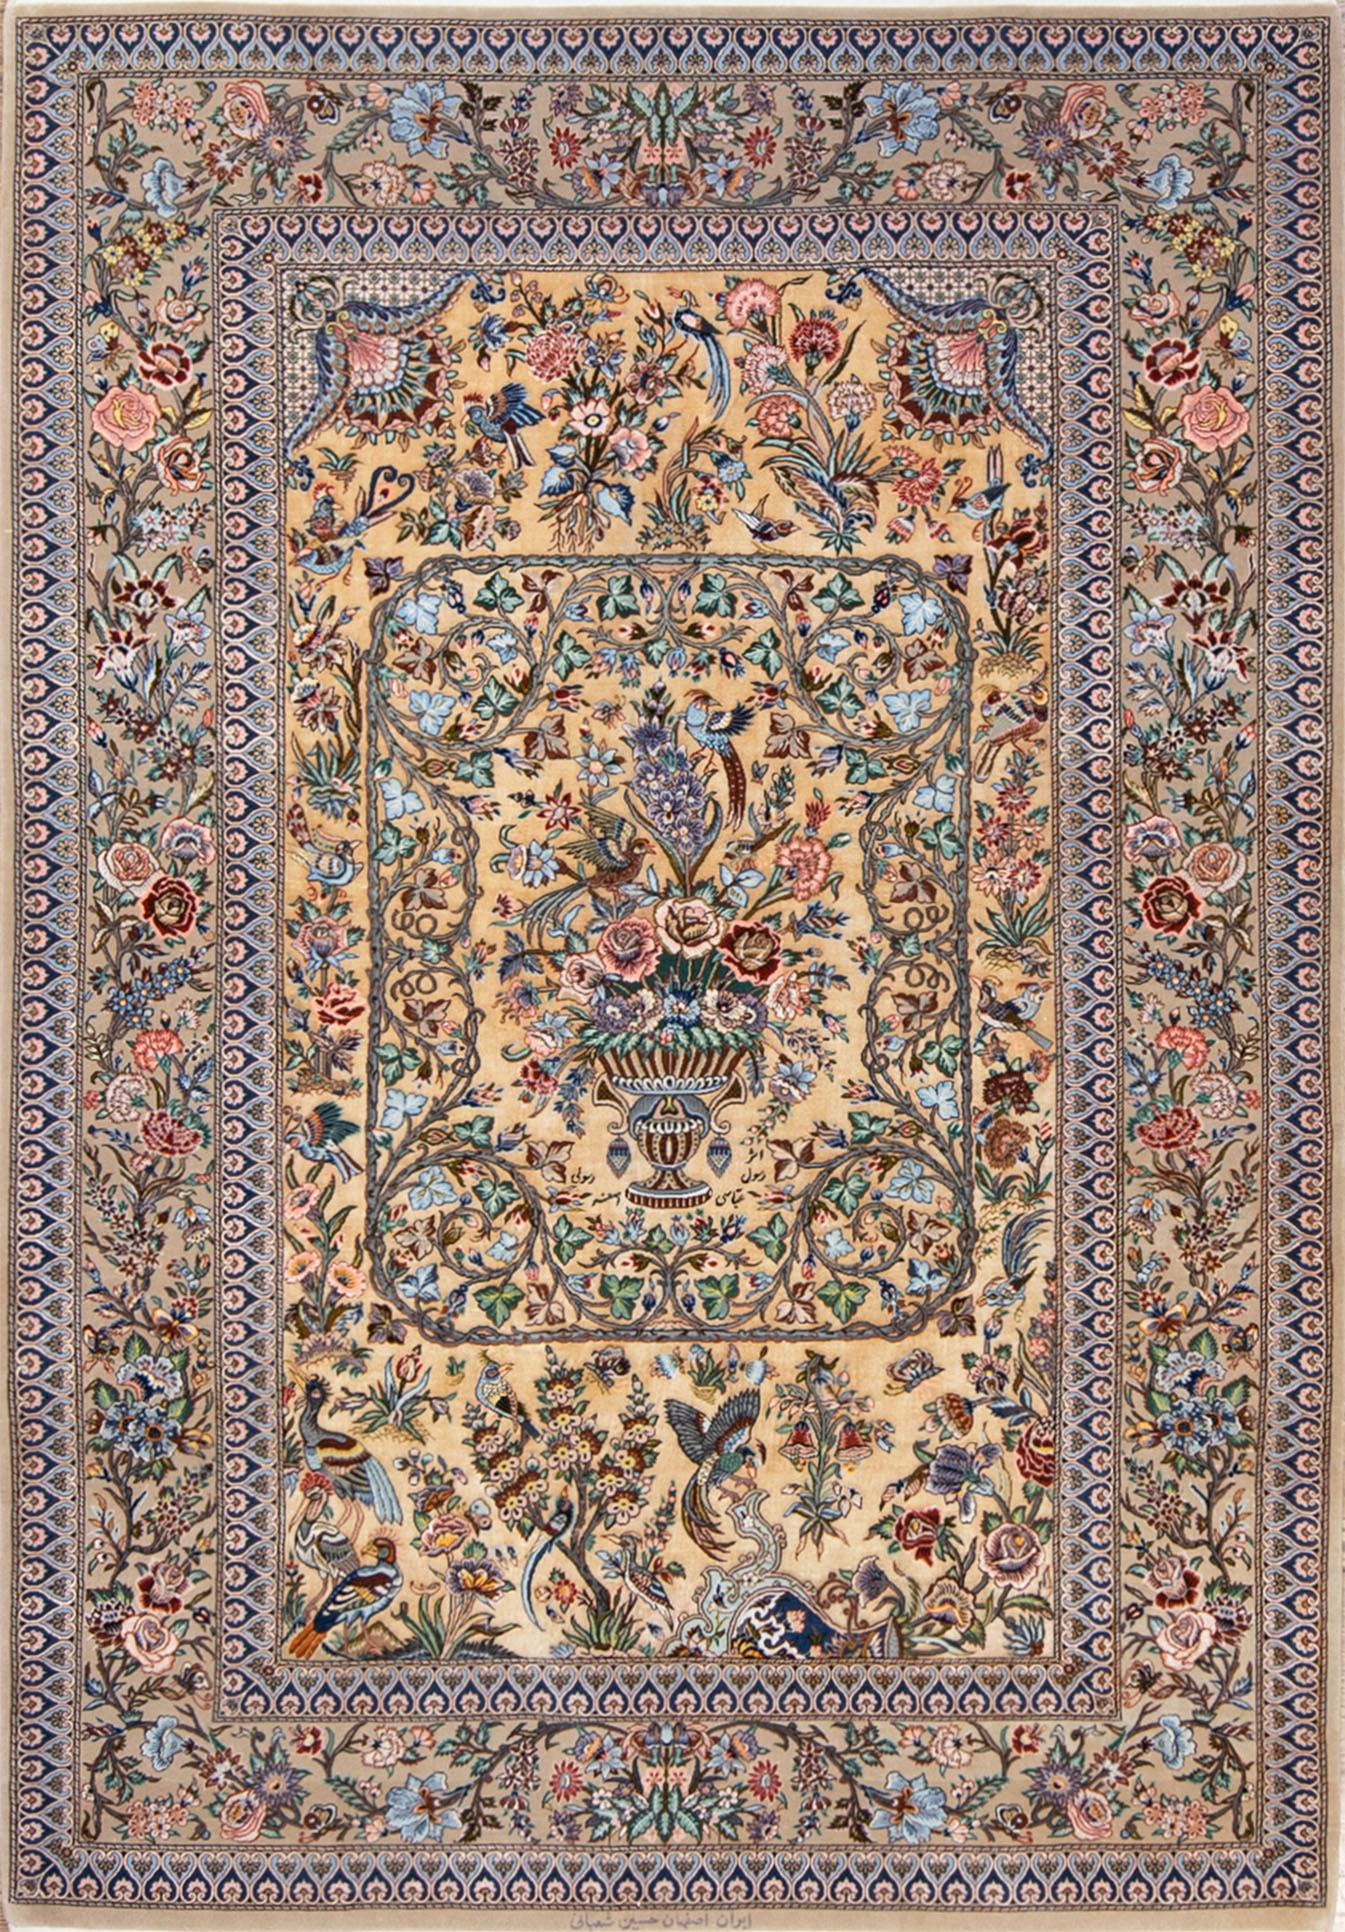 Exclusive rug. Beautiful hand knotted Persian Isfahan rug made of silk and kork wool in gold color. Size 5x7.4